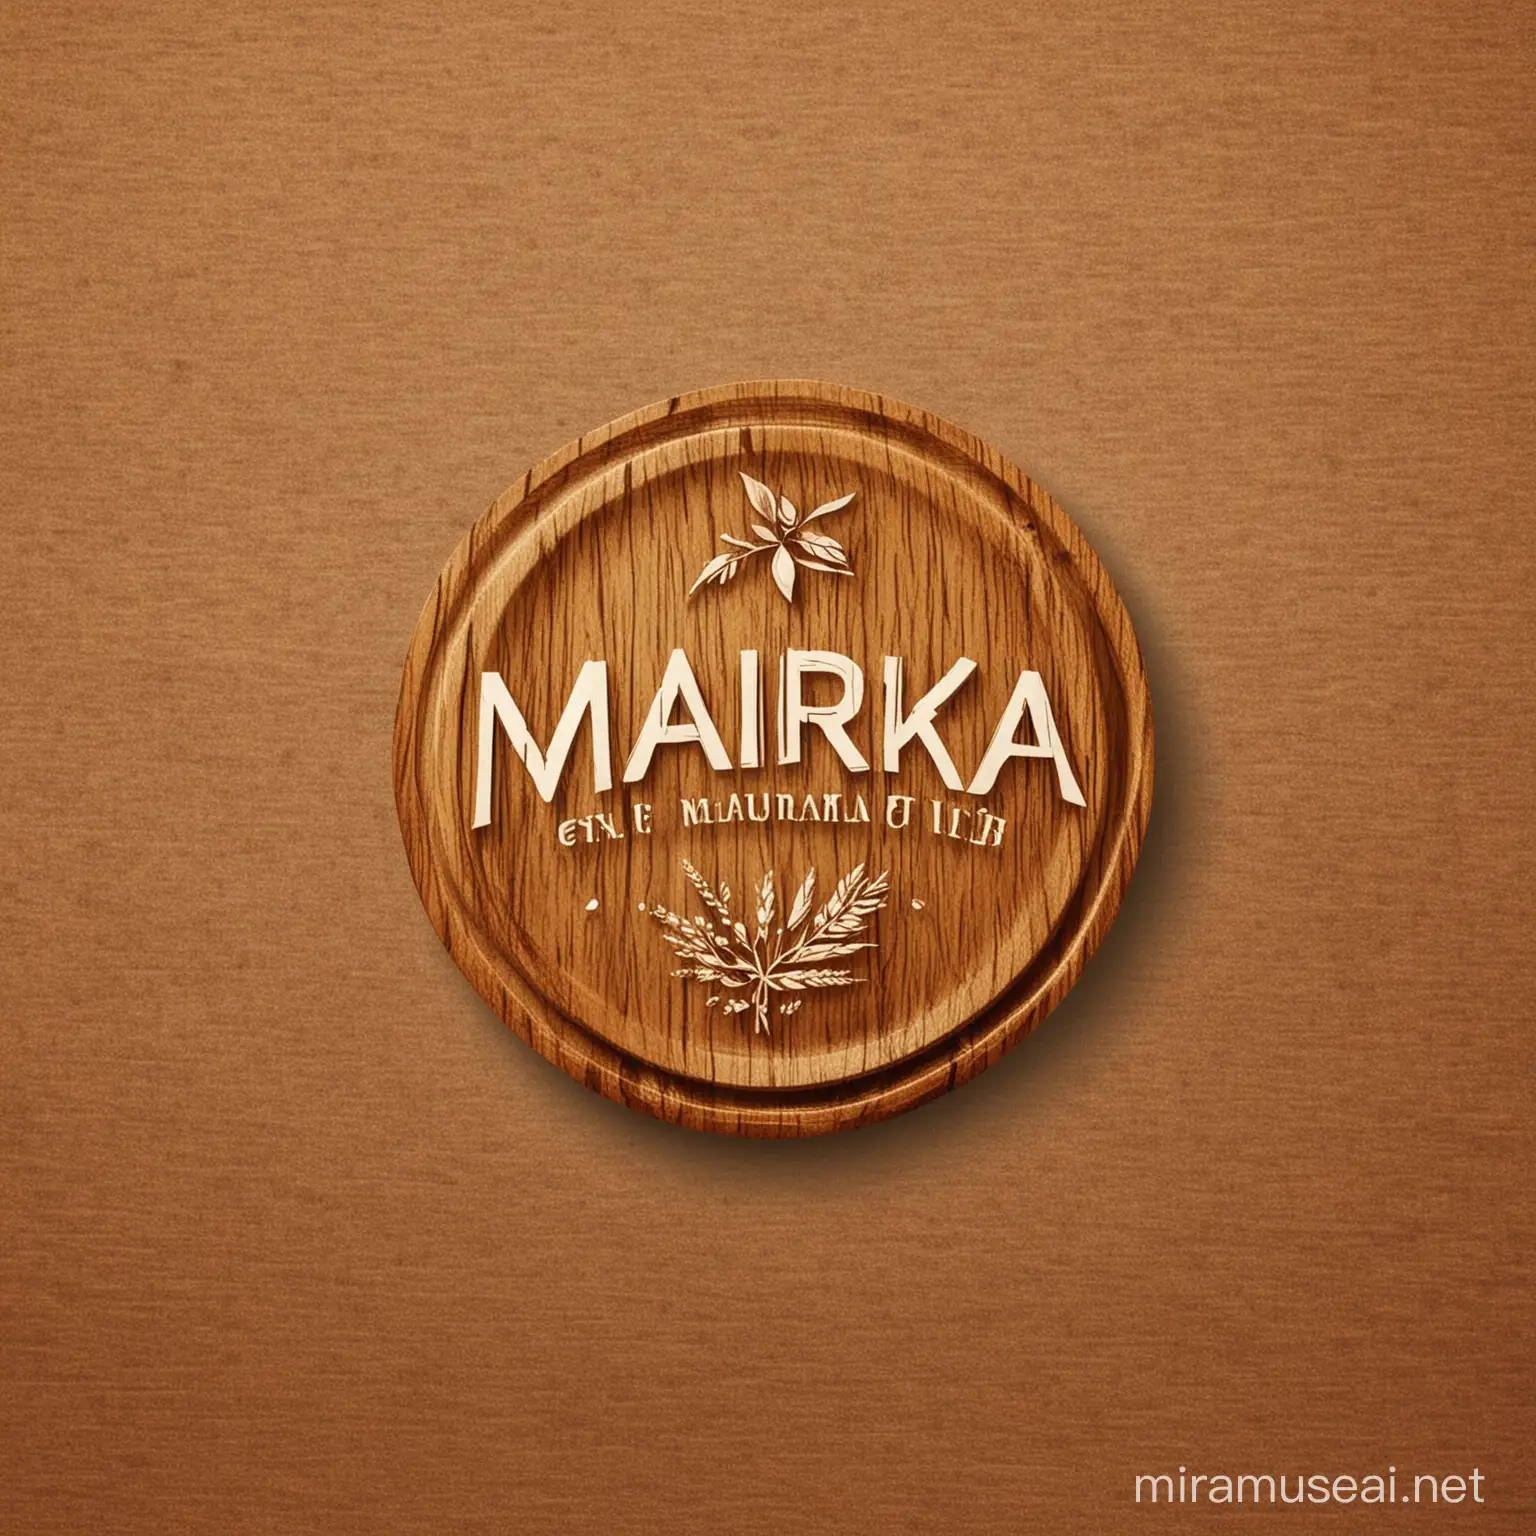 Authentic Wood Press Oil Manufacturing Company Logo MATRIKA Natural Foods